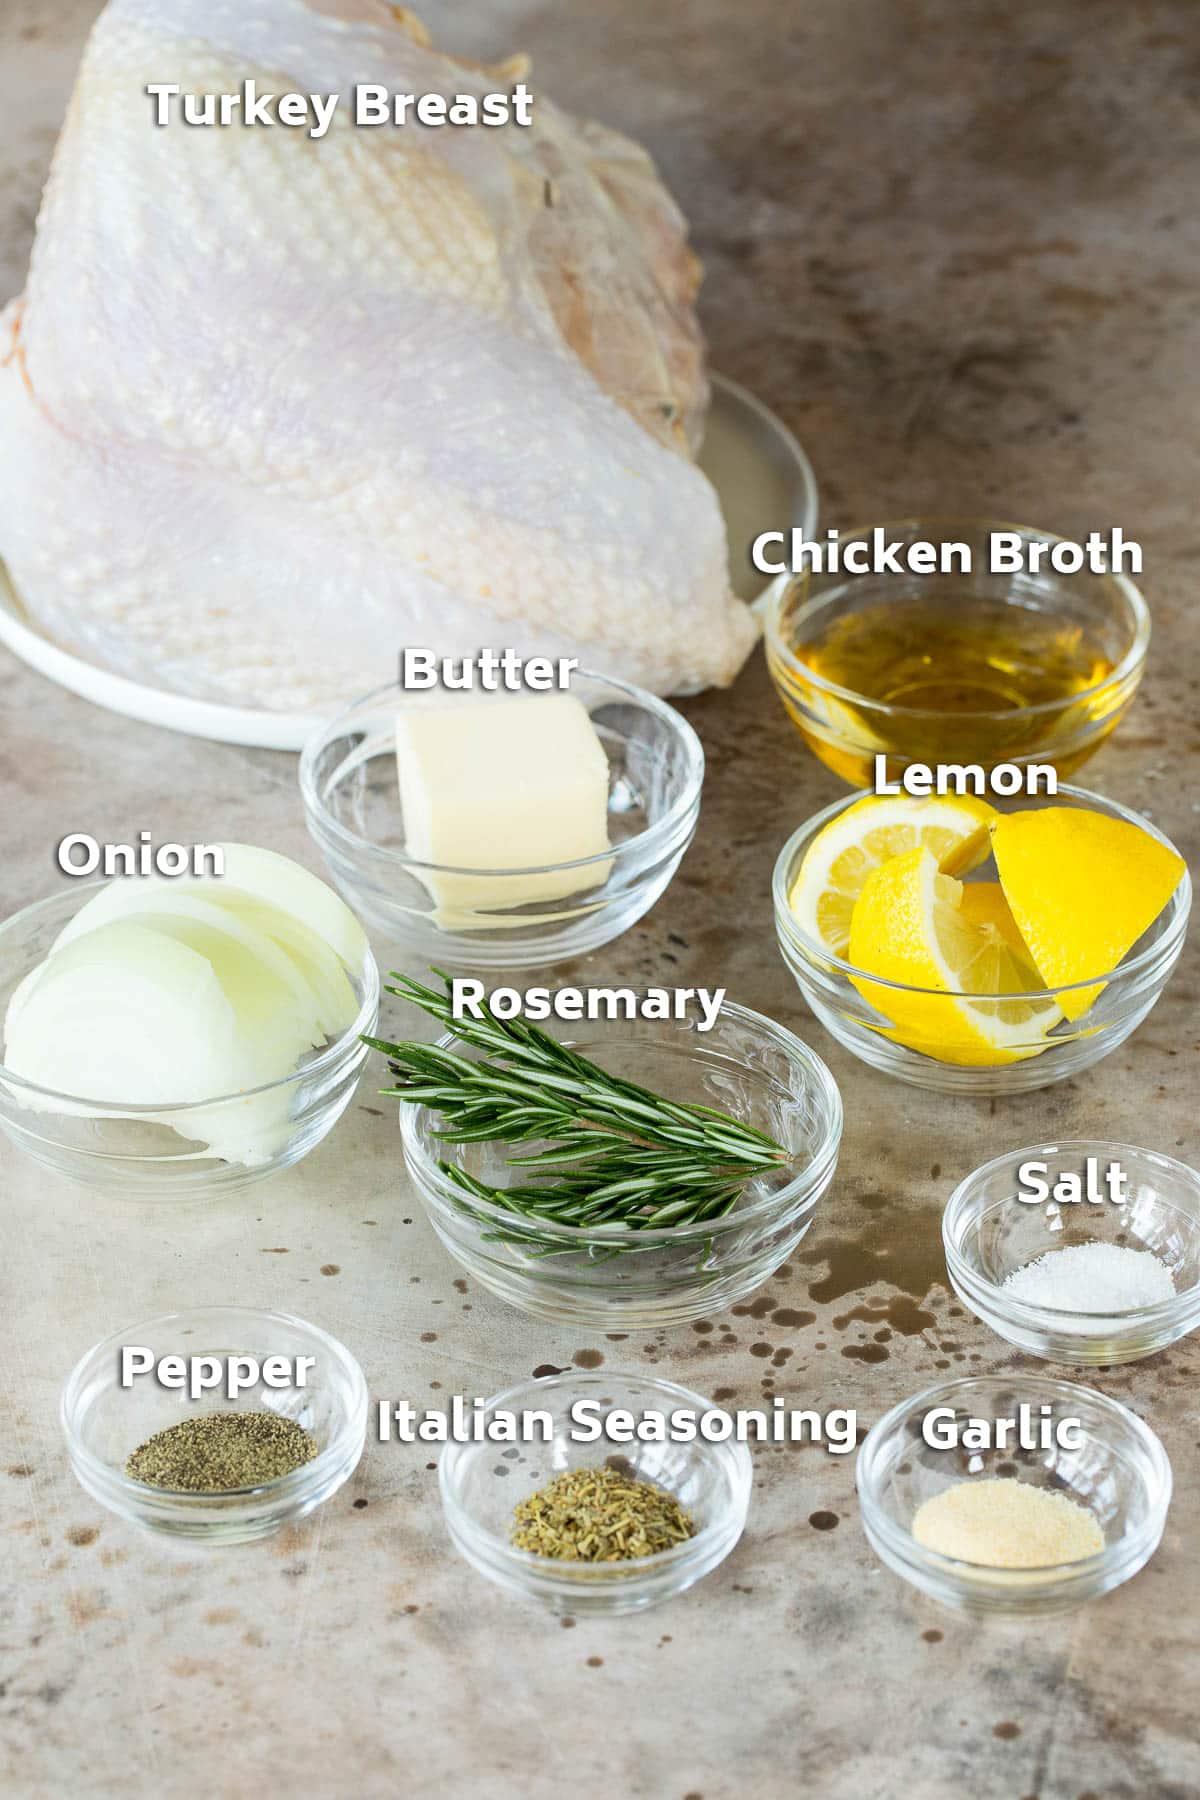 Ingredients including turkey, butter, herbs and spices.